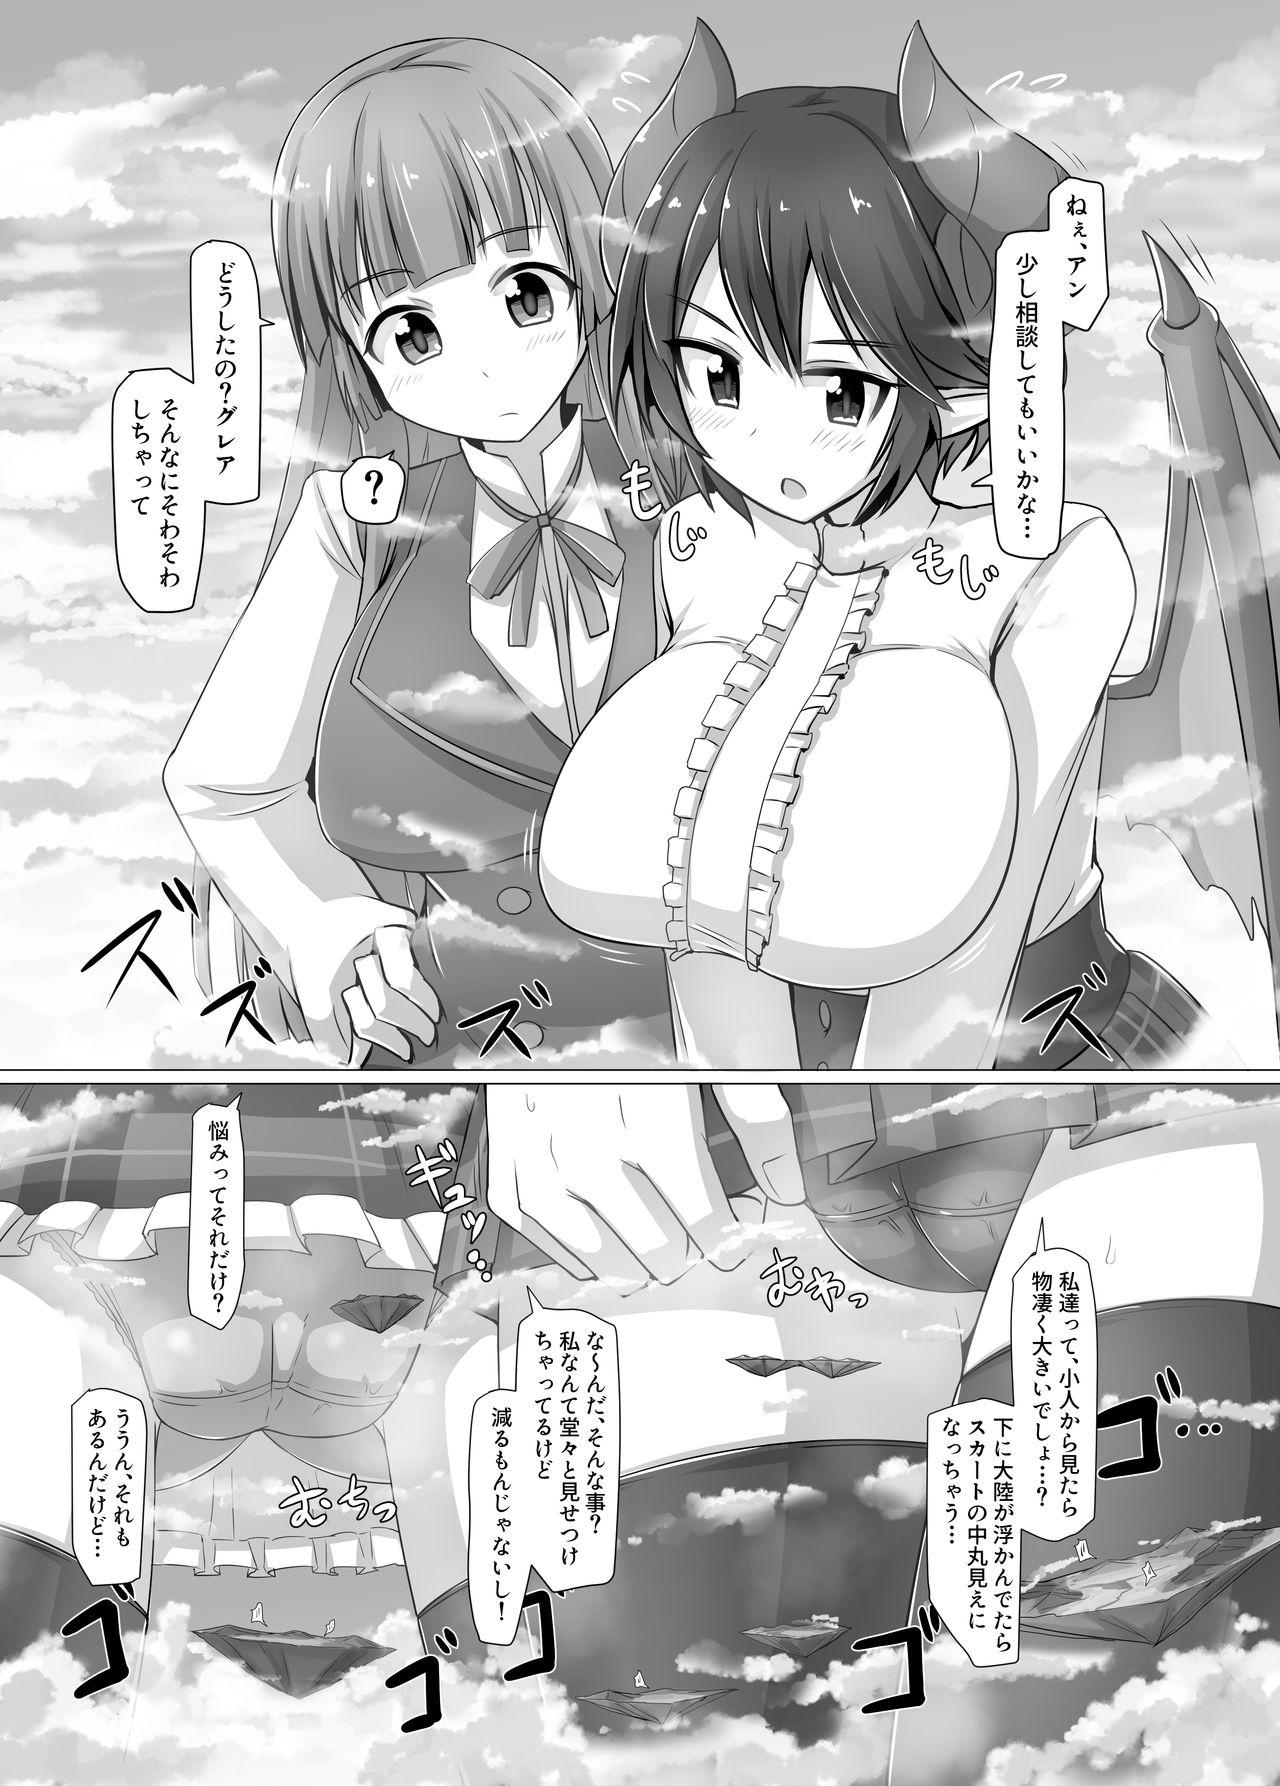 Free Amature Porn Gigantic Gas Situation - Rage of bahamut Manaria friends Anale - Page 2